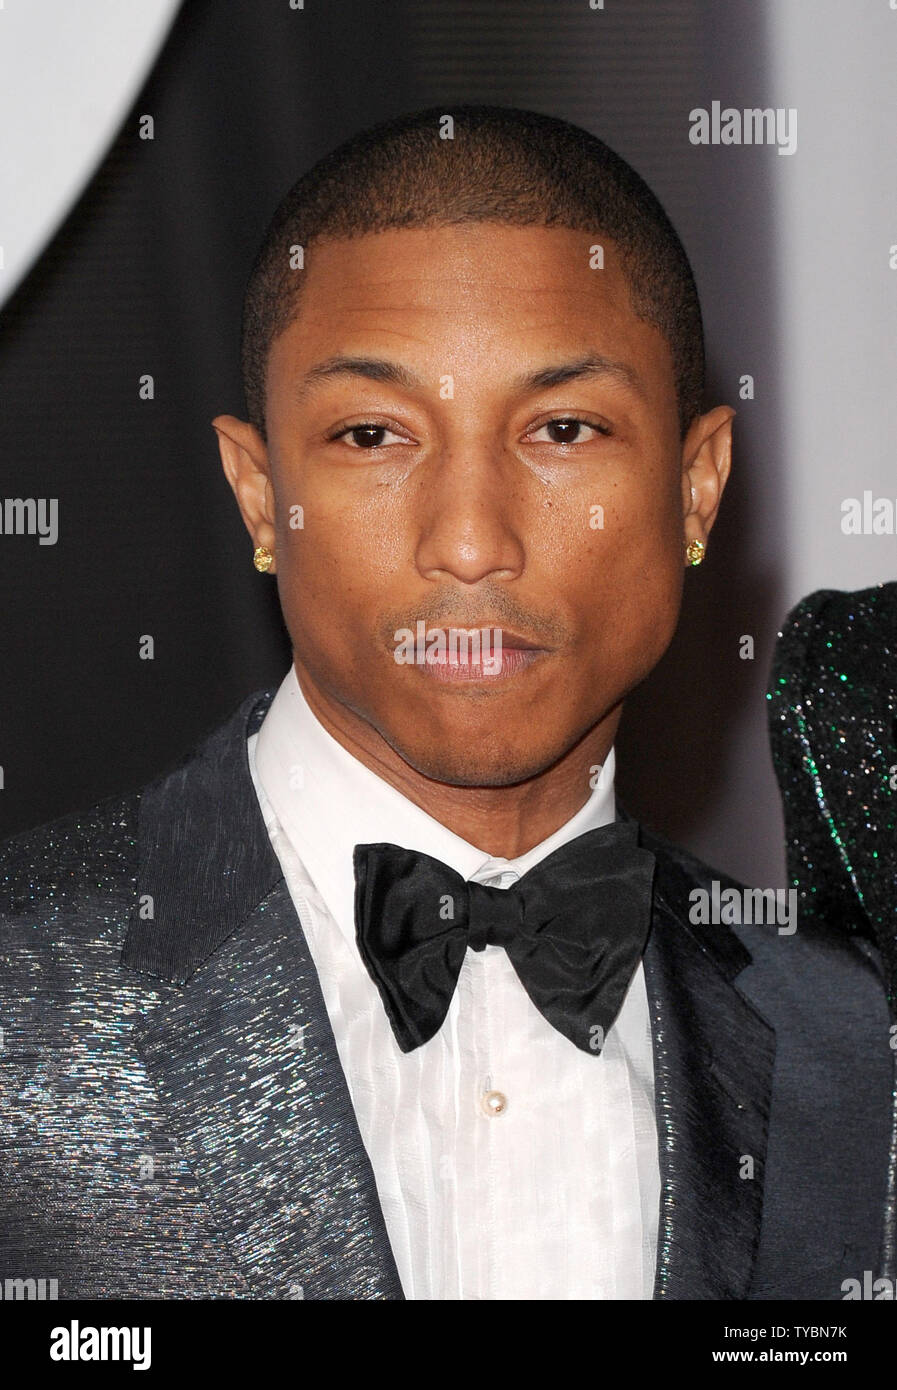 American singer/songwriter Pharrell Williams attends The Brit Awards 2014 at The O2 Arena in London on February 19, 2014.     UPI/Paul Treadway Stock Photo